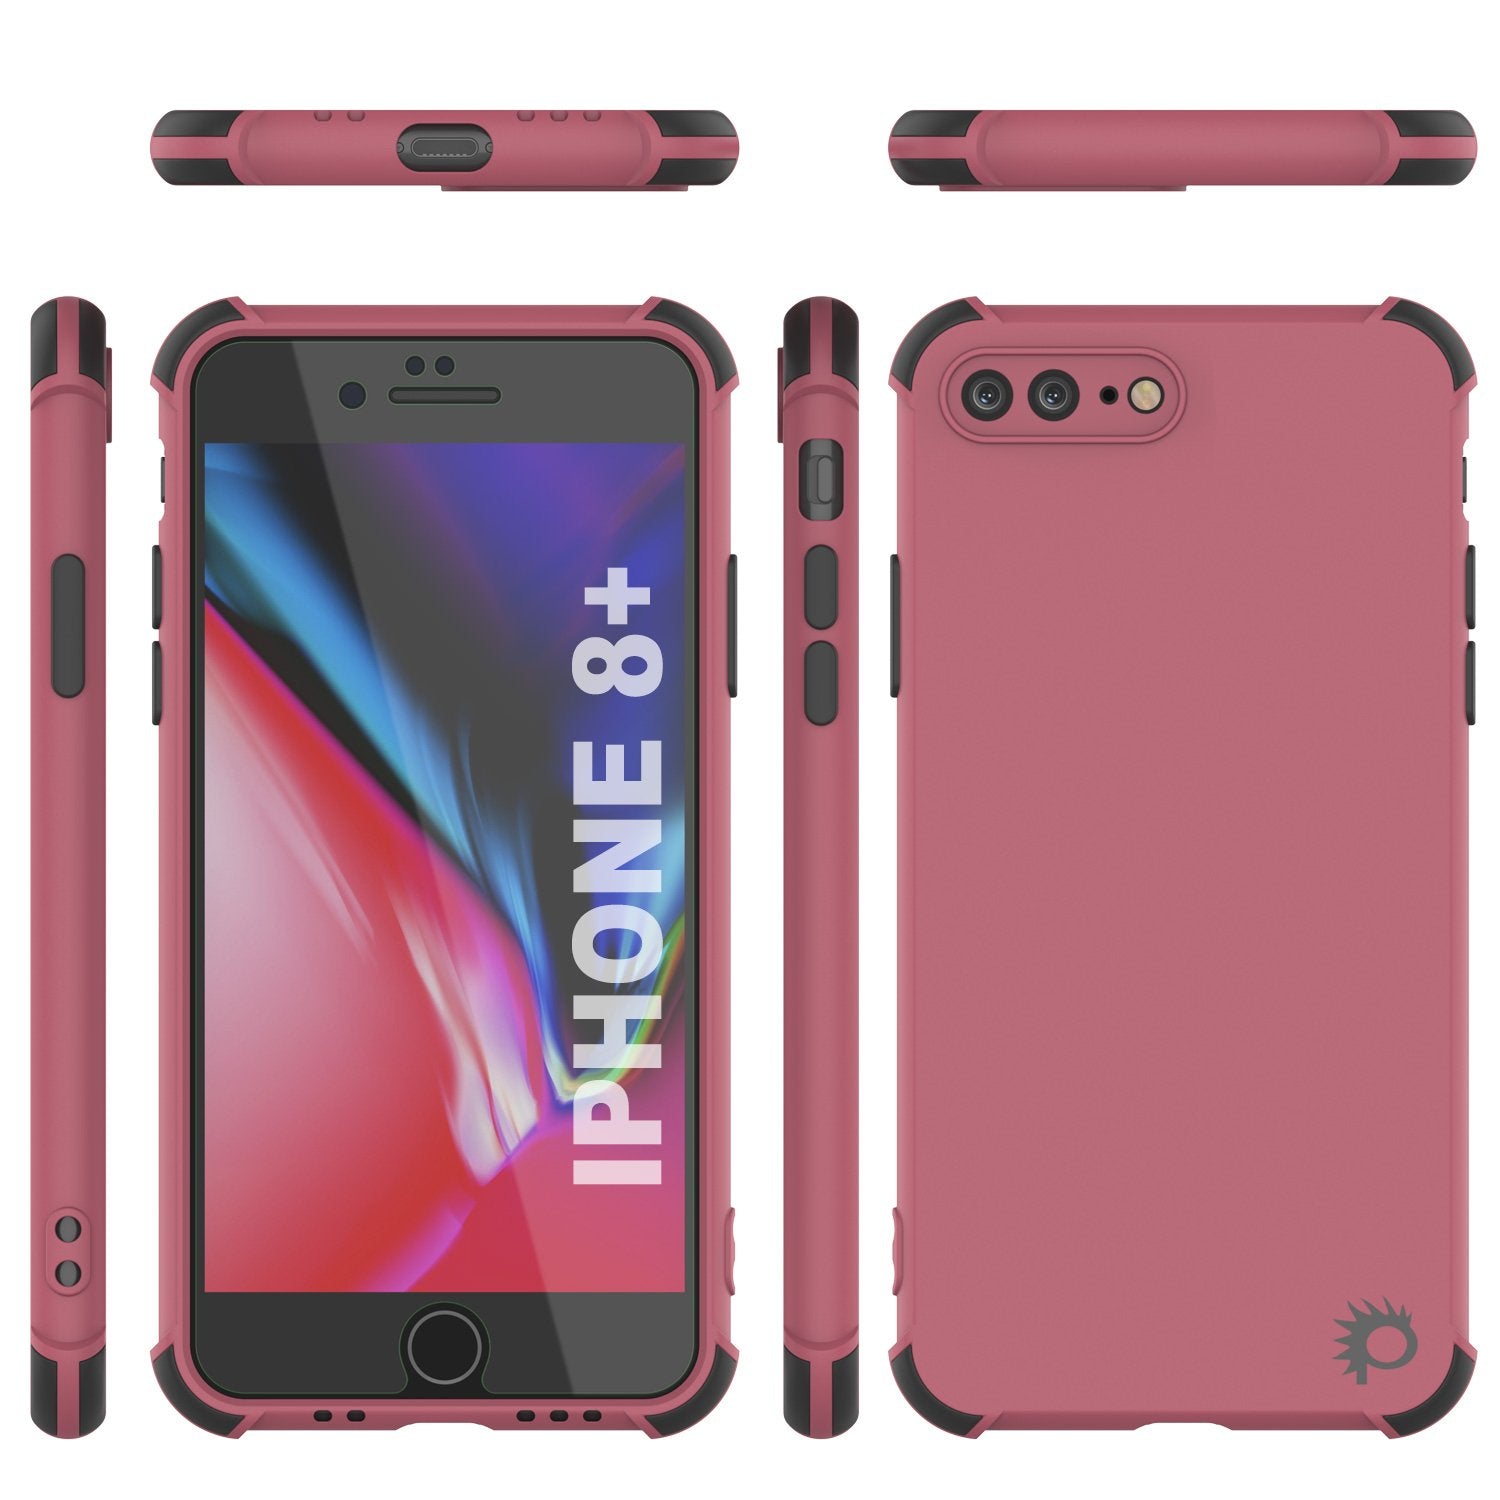 Punkcase Protective & Lightweight TPU Case [Sunshine Series] for iPhone 8+ Plus [Rose]